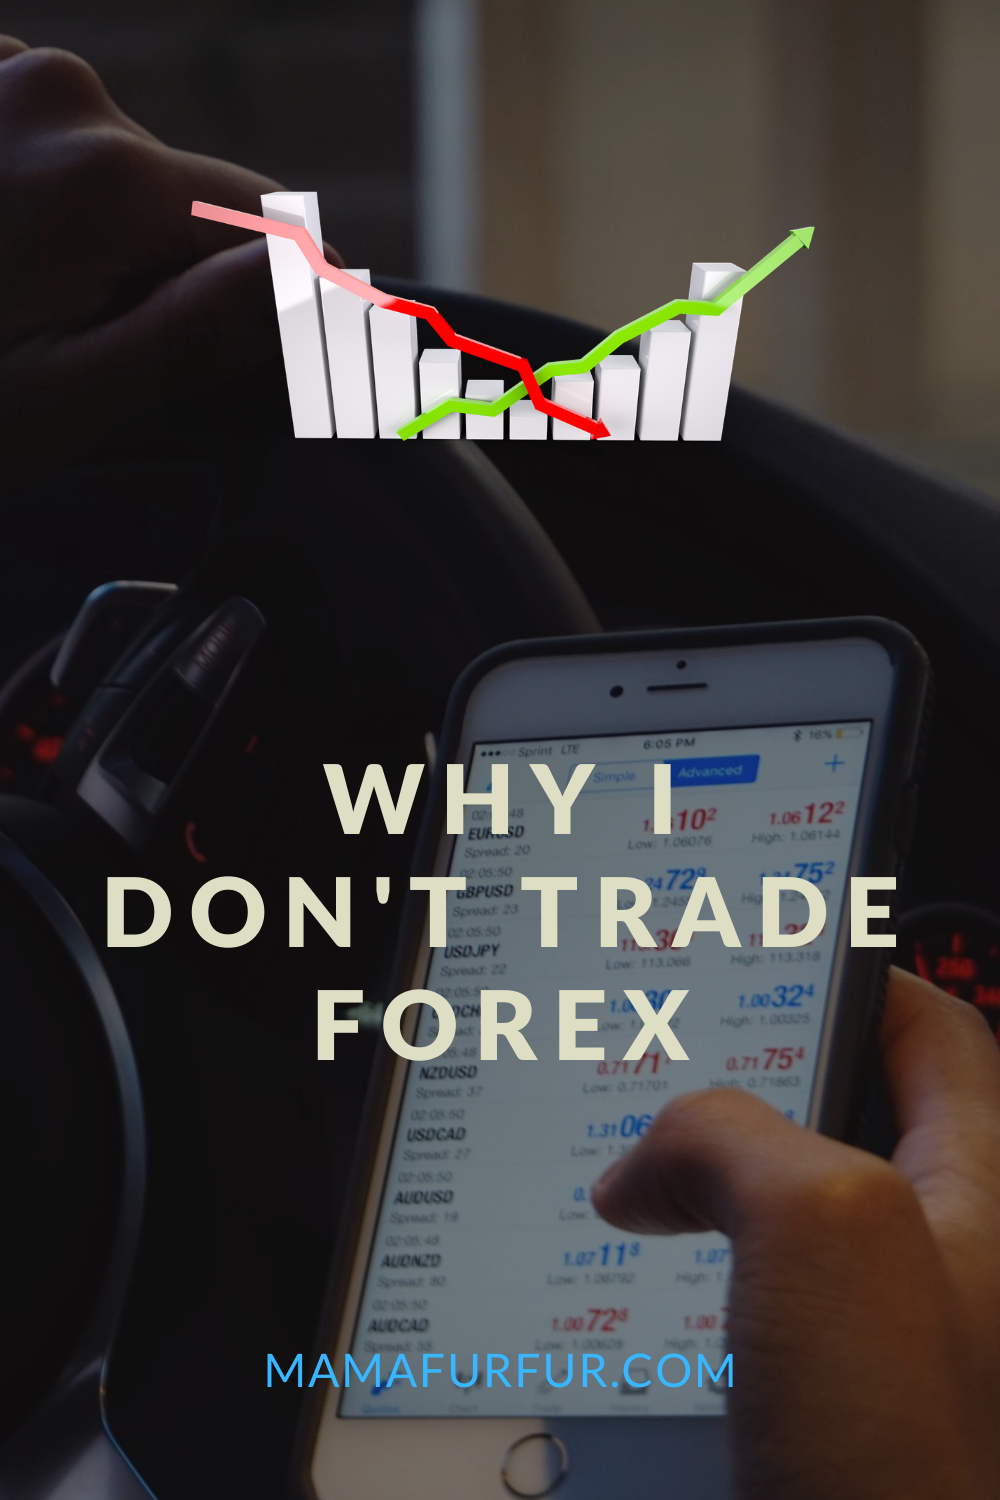 Why I Don't Trade Forex